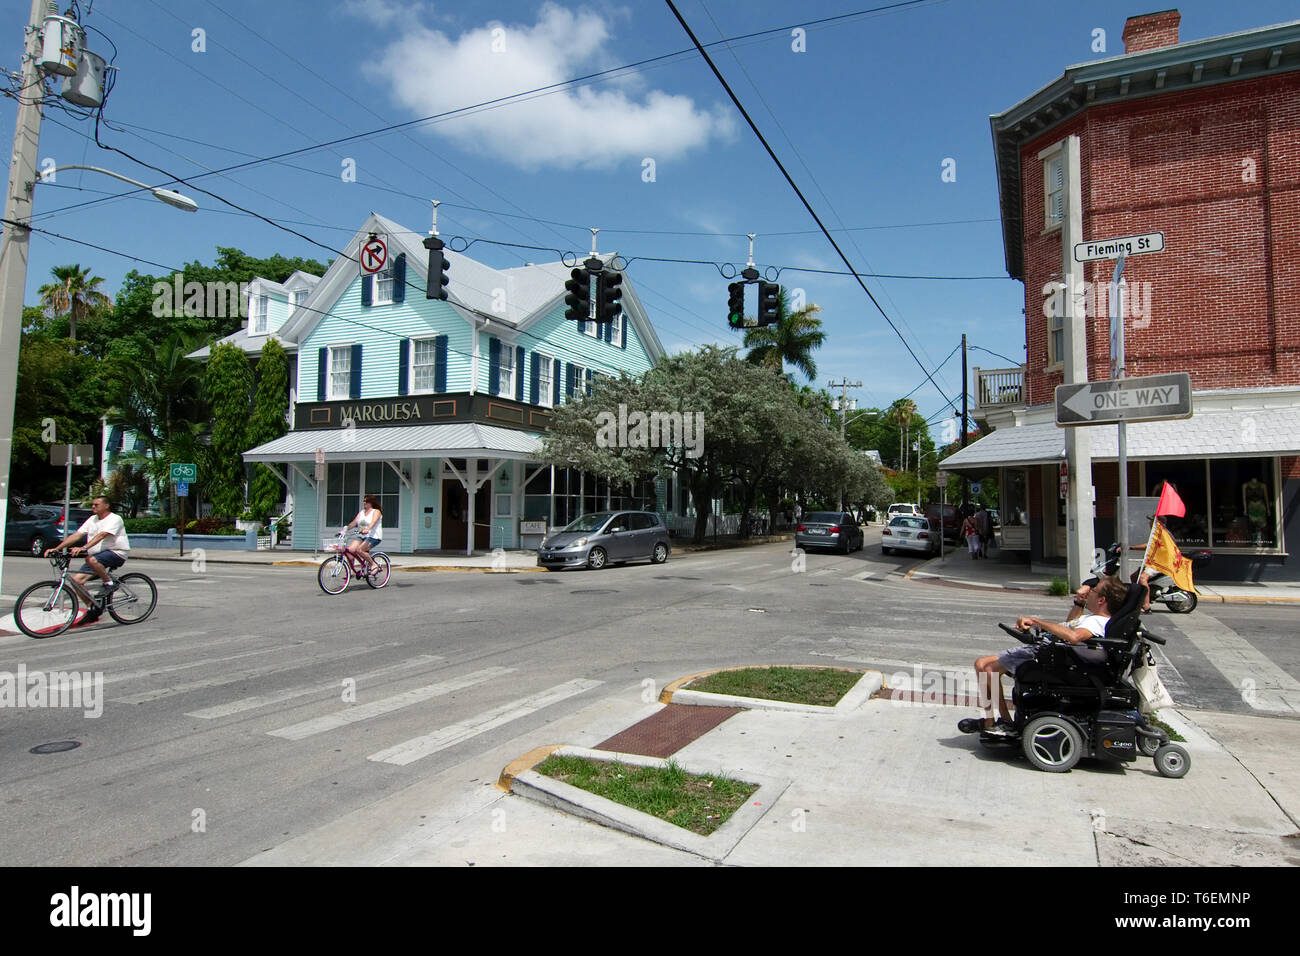 Key West, Florida, USA - 2019: People ride bicycles on a sunny day at the downtown district, as it is customary in this small touristic town. Stock Photo